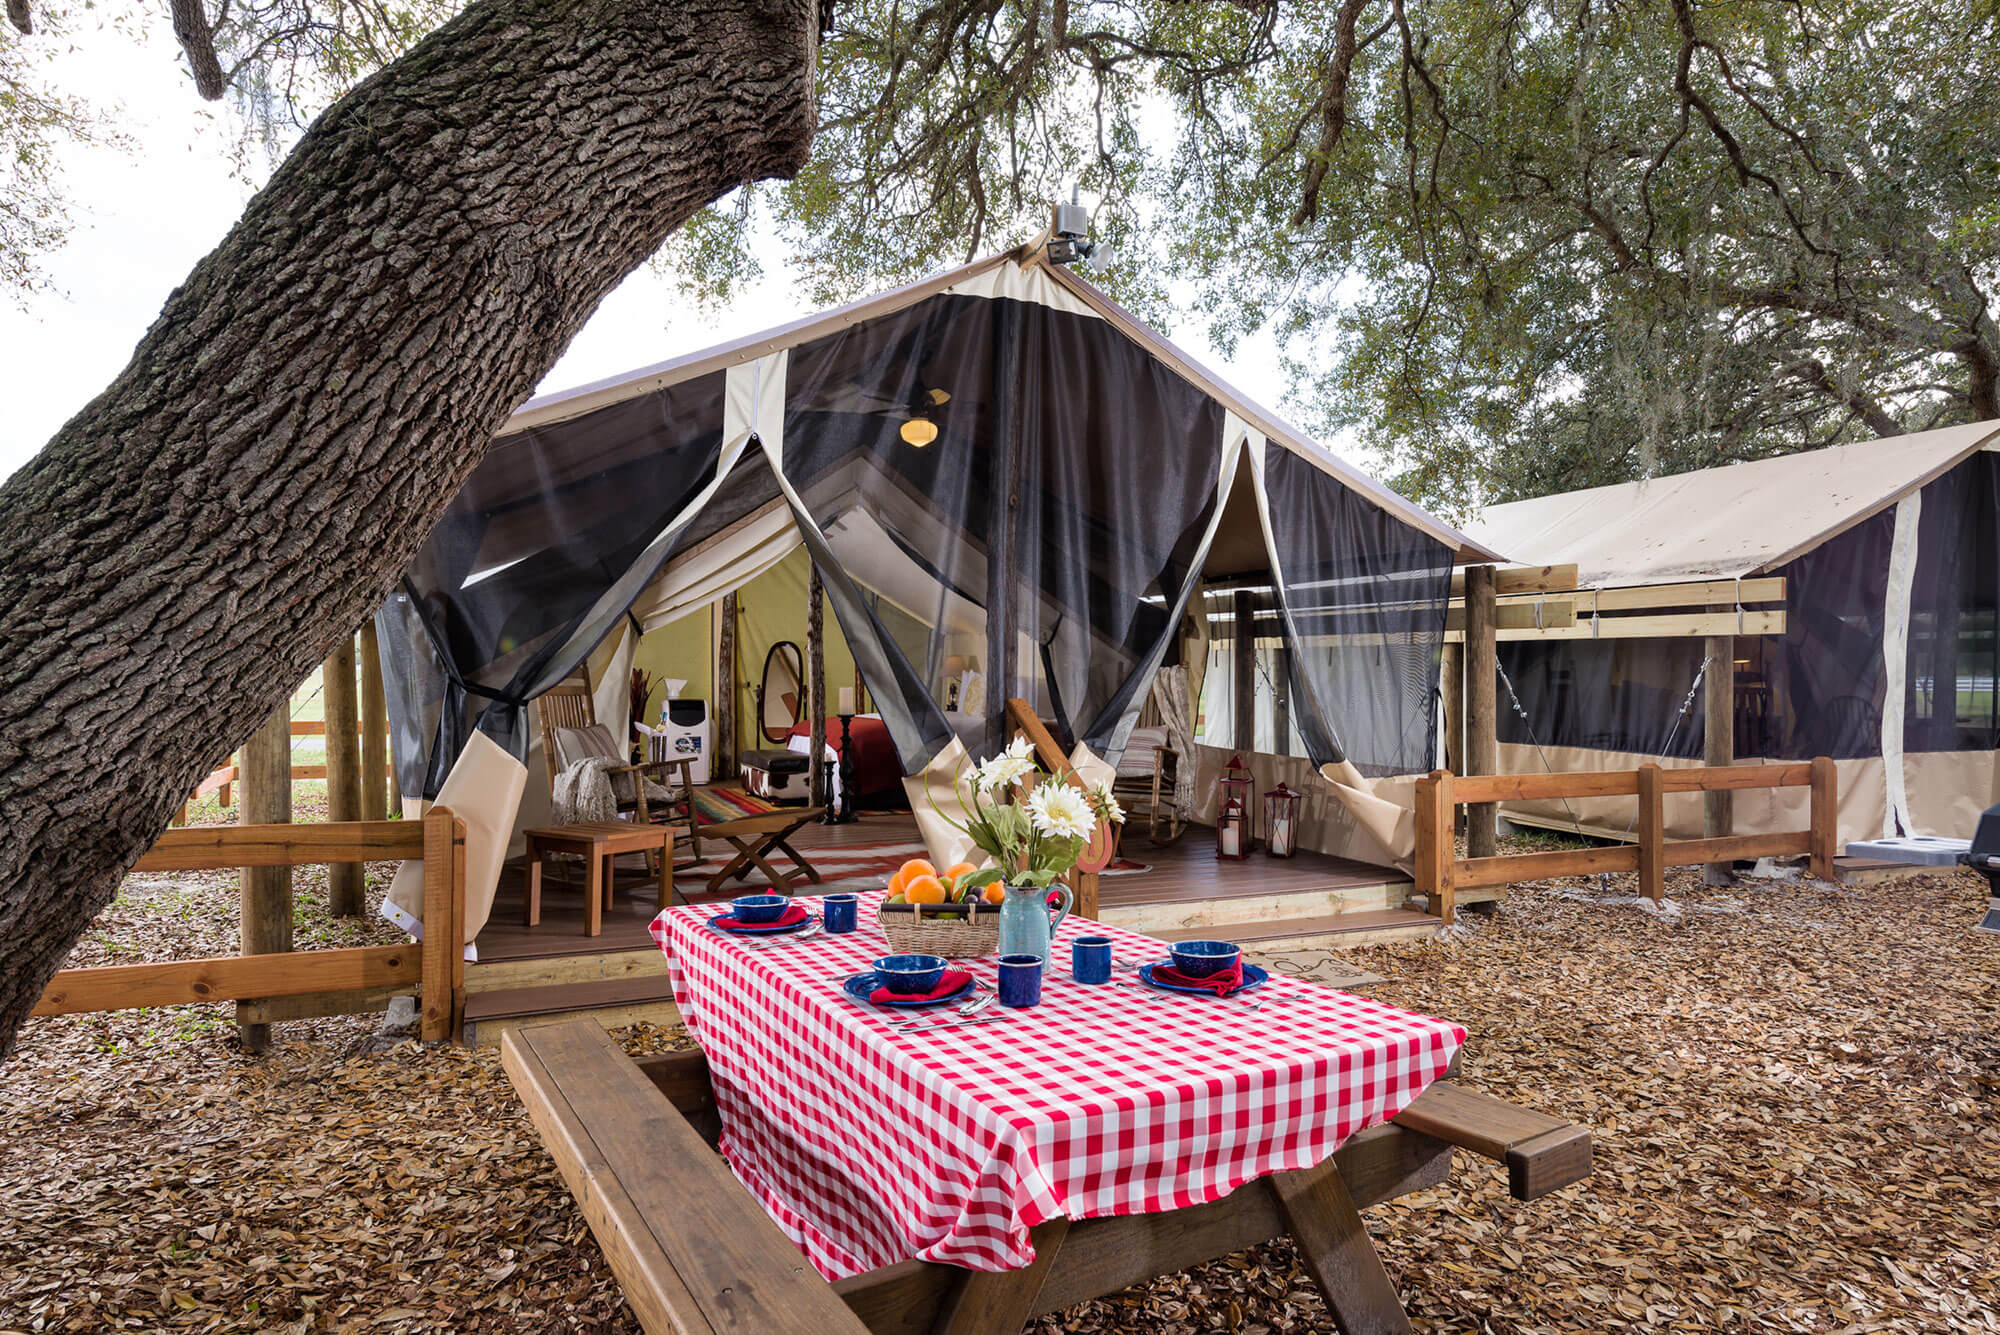 Luxury Glamping Resort in Central Florida - Glamping Tent and common area at Westgate River Ranch Resort & Rodeo near Lake Wales FL